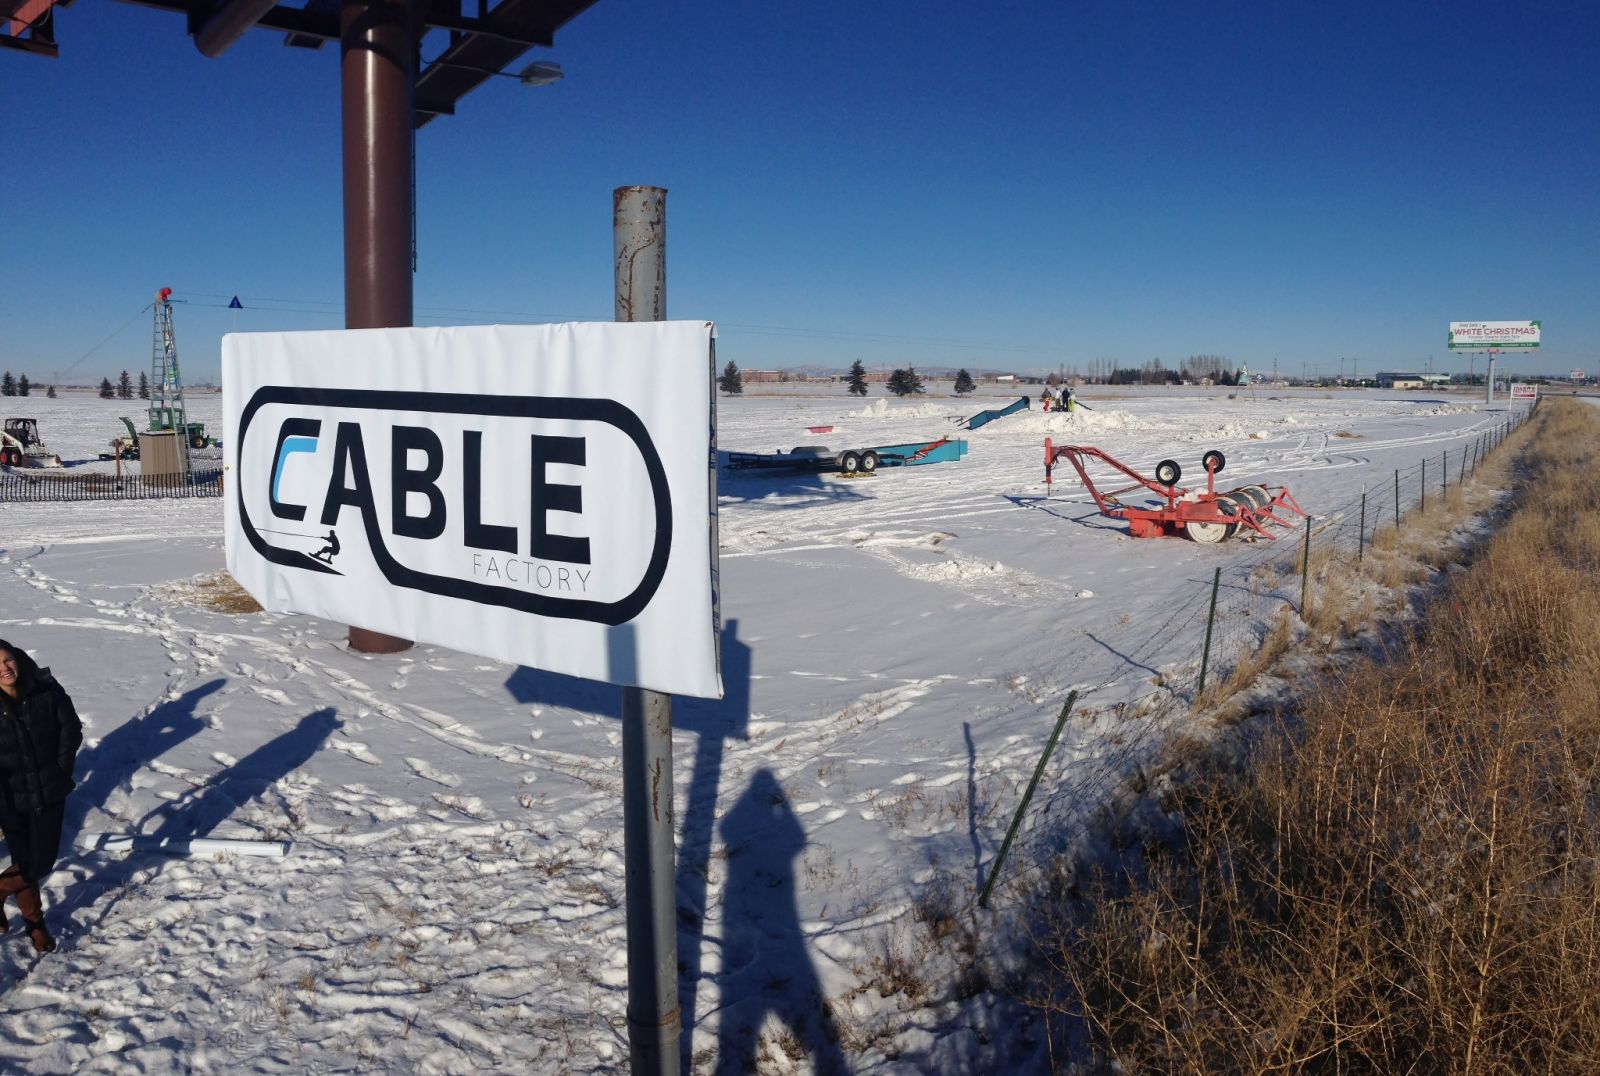 The Cable Factory, Snowboard Cable System